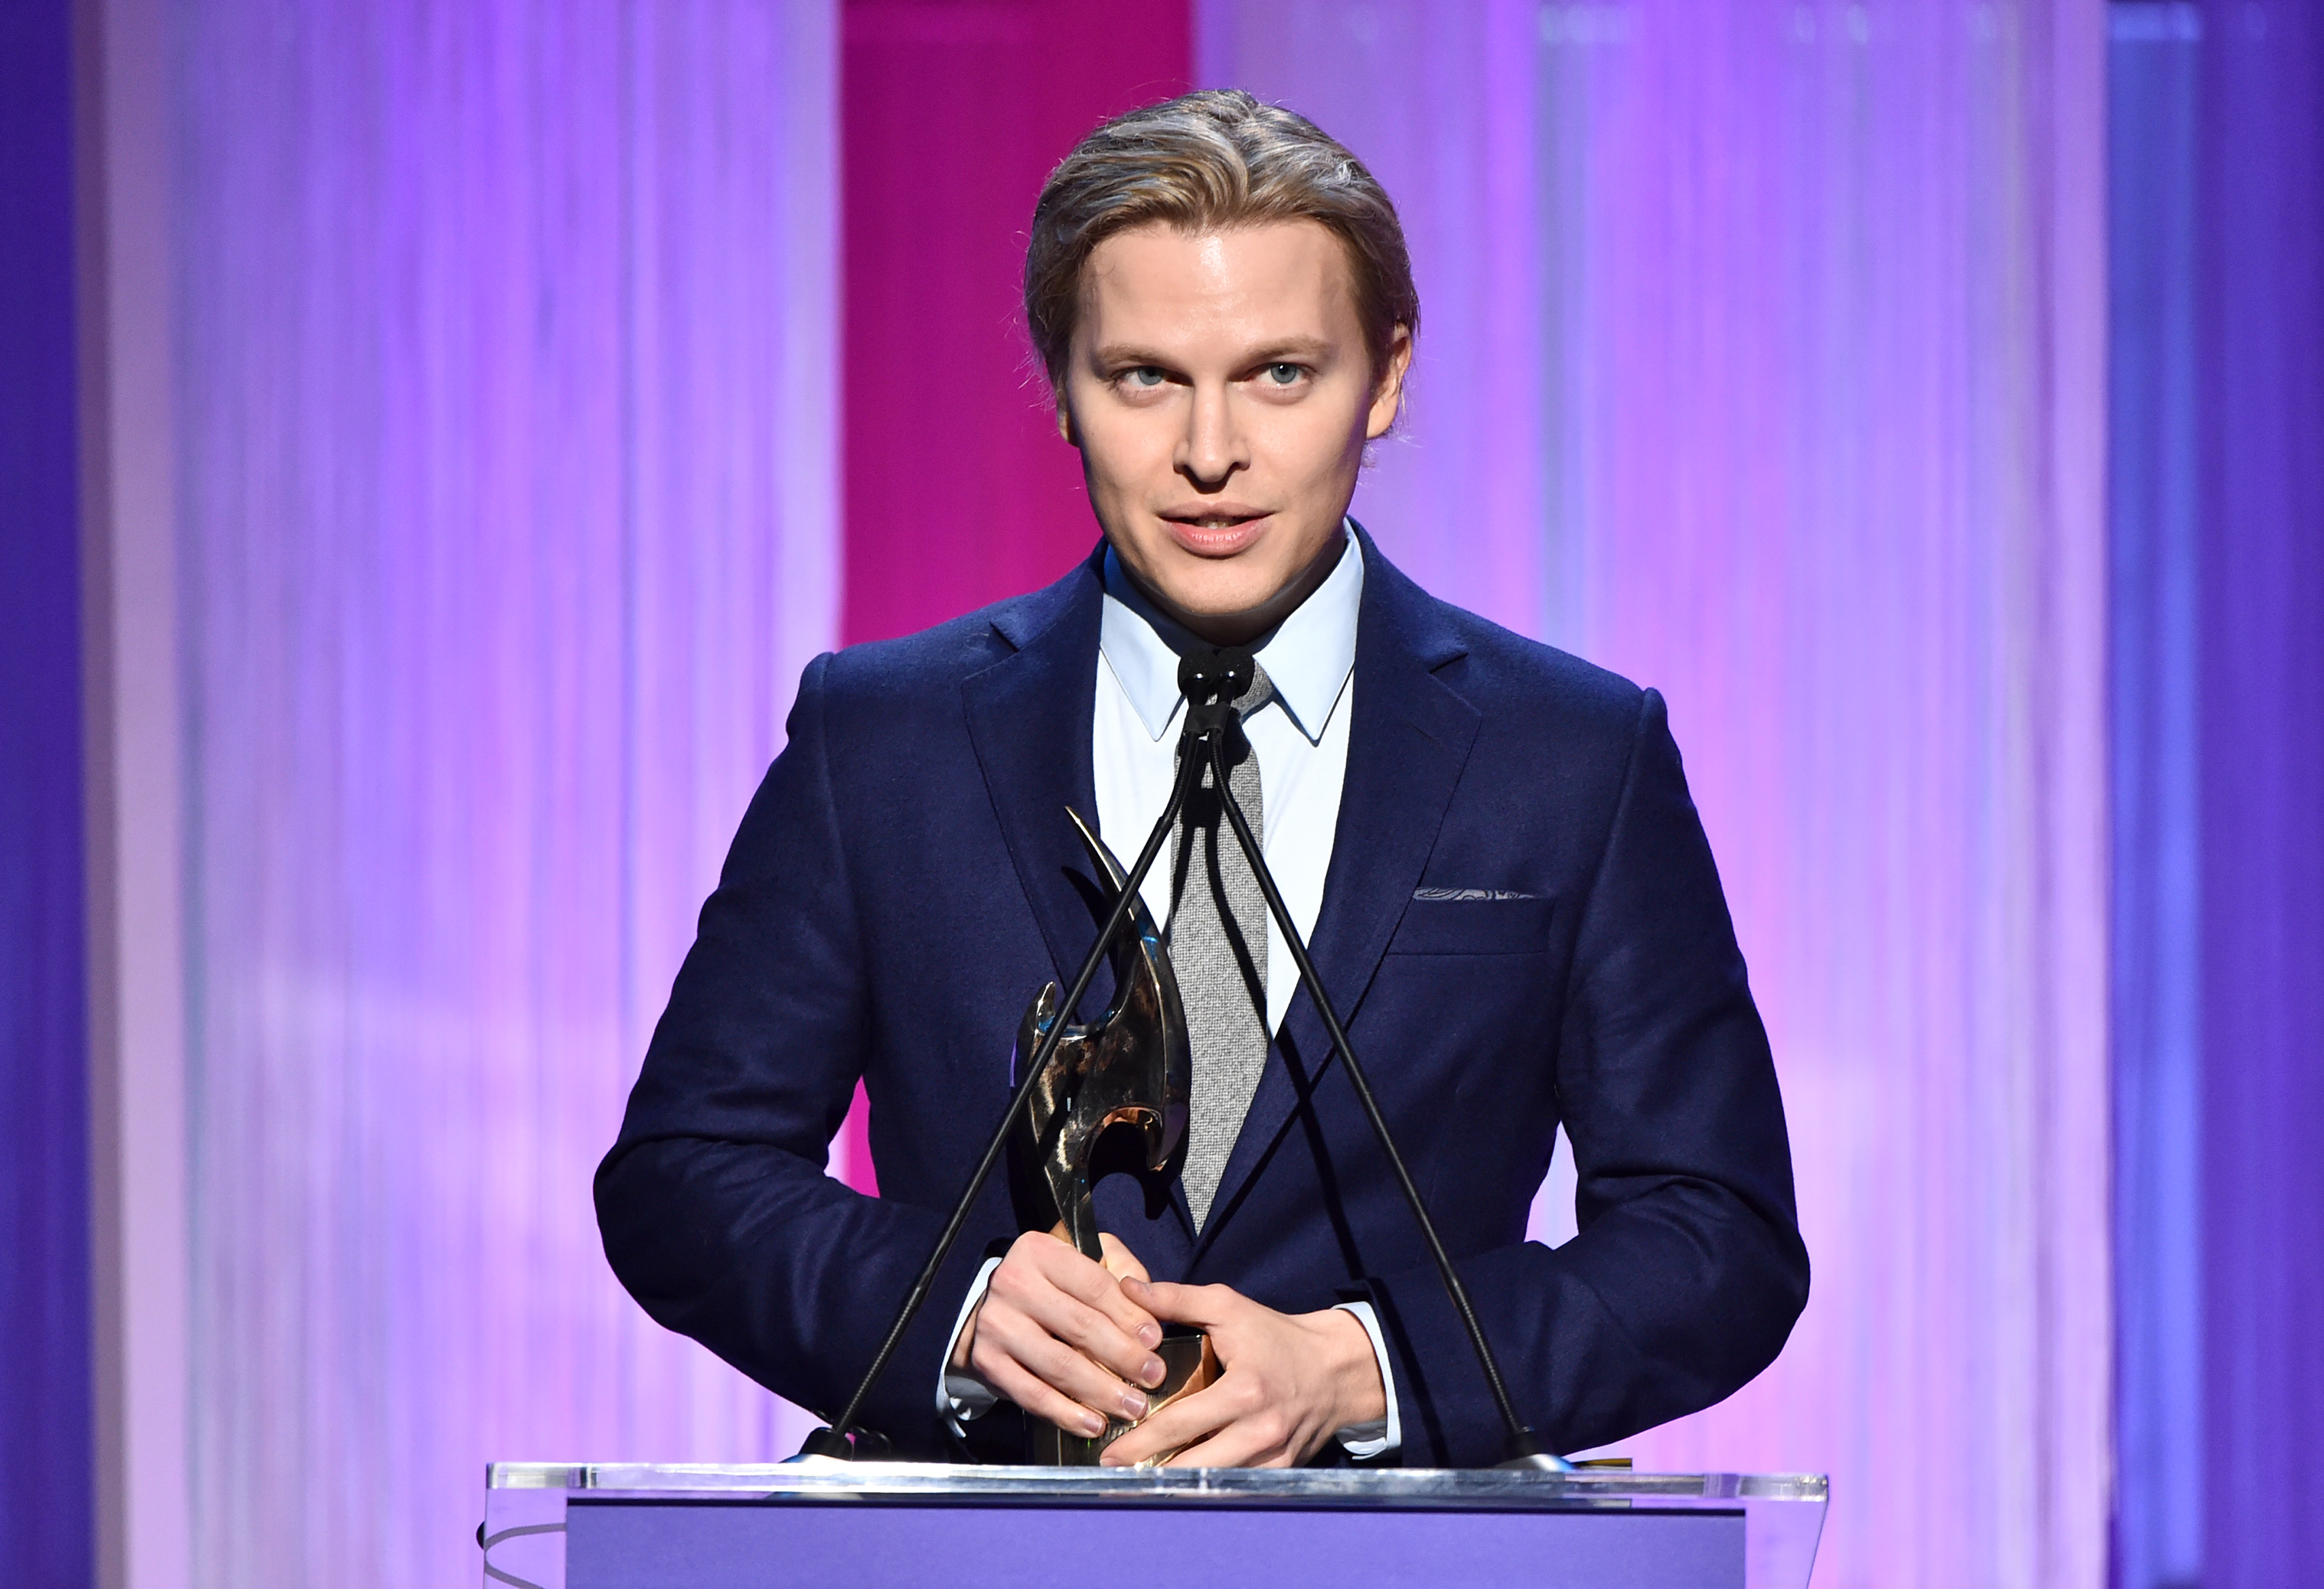 Honoree Ronan Farrow accepts the Equity in Entertainment Award onstage during The Hollywood Reporter's Power 100 Women in Entertainment at Milk Studios on December 11, 2019 in Hollywood, California. (Alberto E. Rodriguez/Getty Images for The Hollywood Reporter)